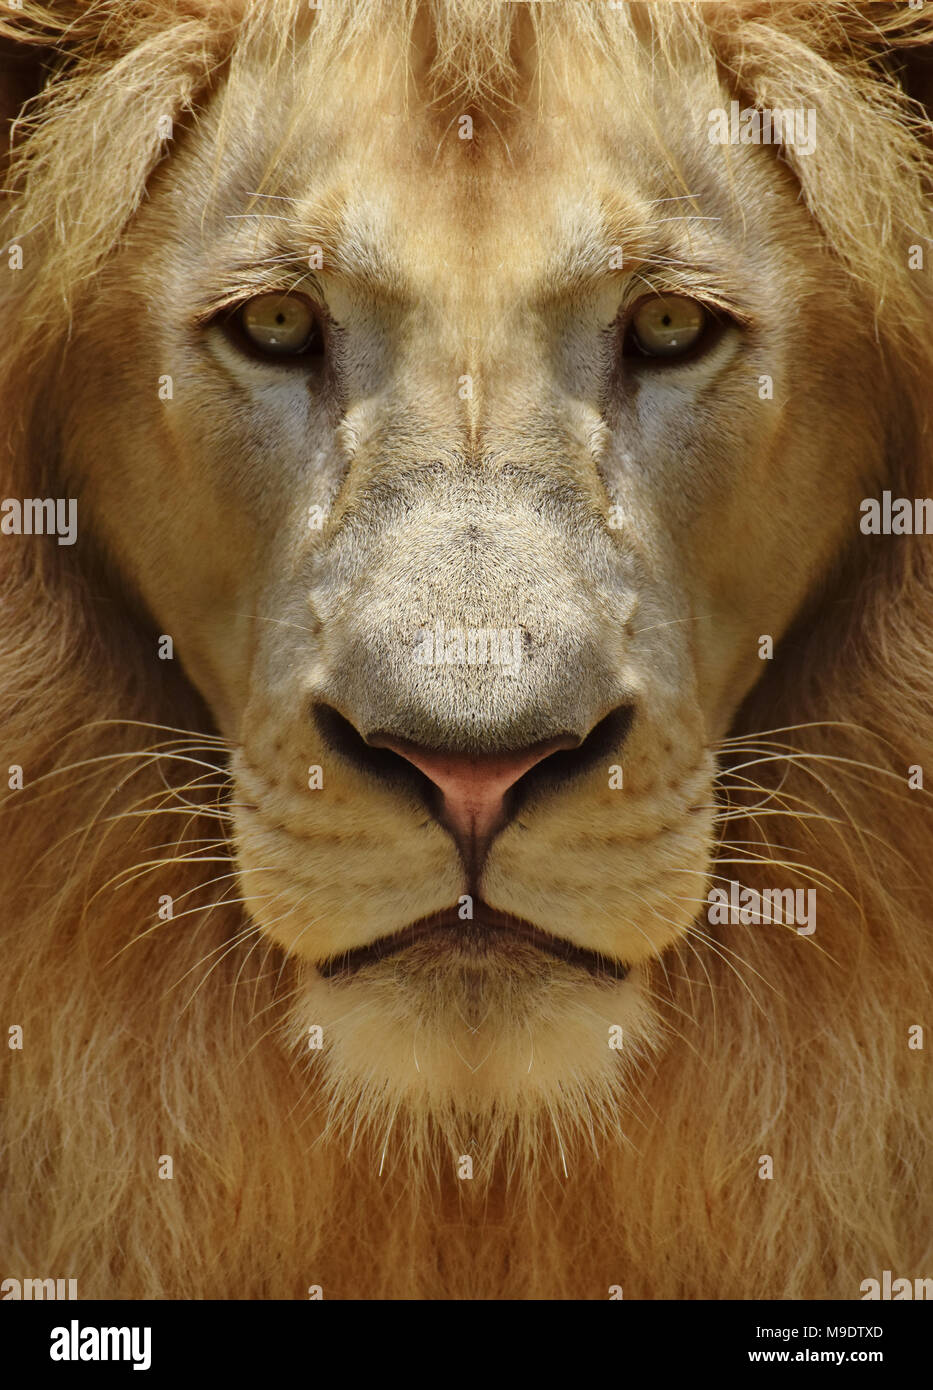 Close-up portrait of the face of a male lion (Panthera leo). Stock Photo